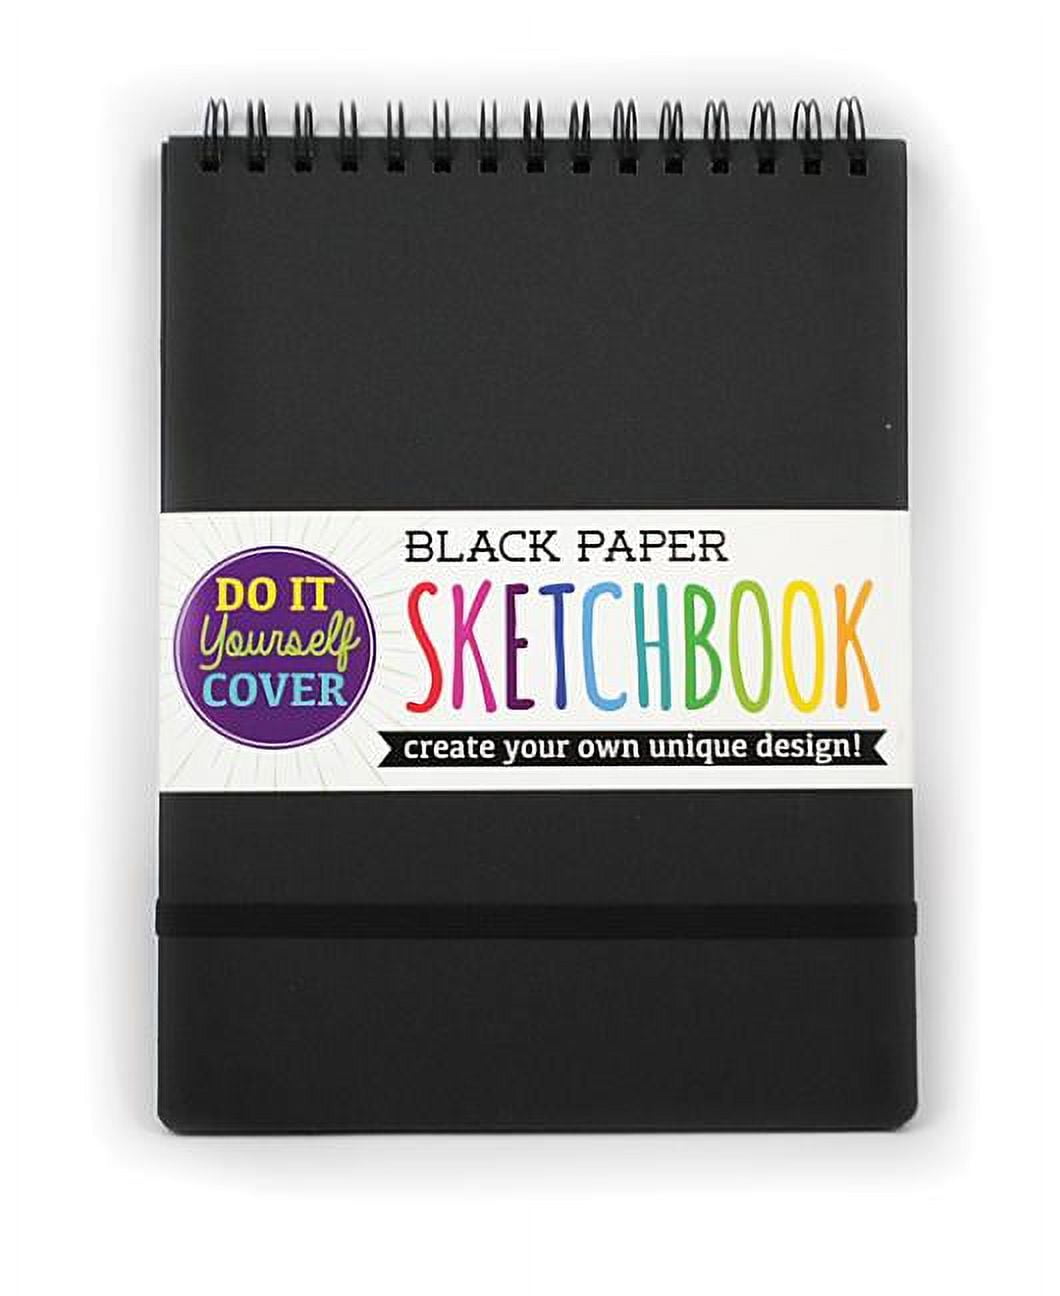 Buy Tinywalk N Black Sheet Black Pages Drawing Pad Landscape Sketch Book  Thick Paper Thick Sheets (A4 Size,50 Sheets/100 Pages,215 GSM Pack of 1)  Online at Lowest Price Ever in India